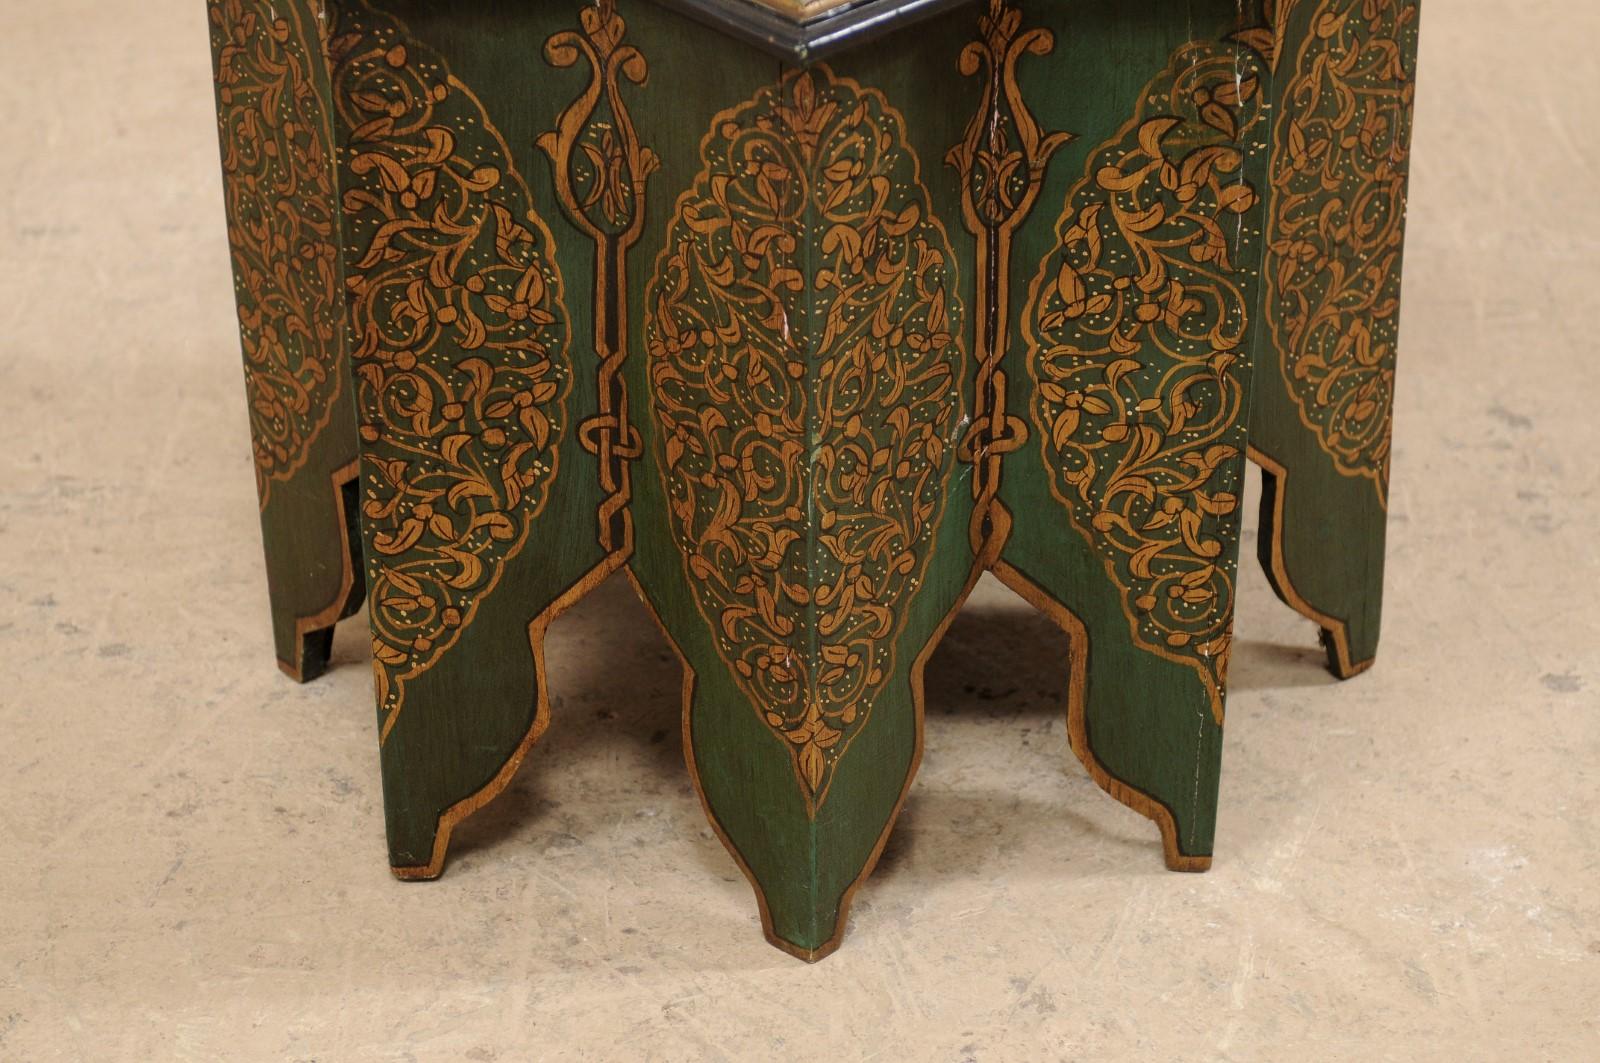 Moroccan Morrish Star Shaped Tea or Side Table, in Green, Black and Gold 1